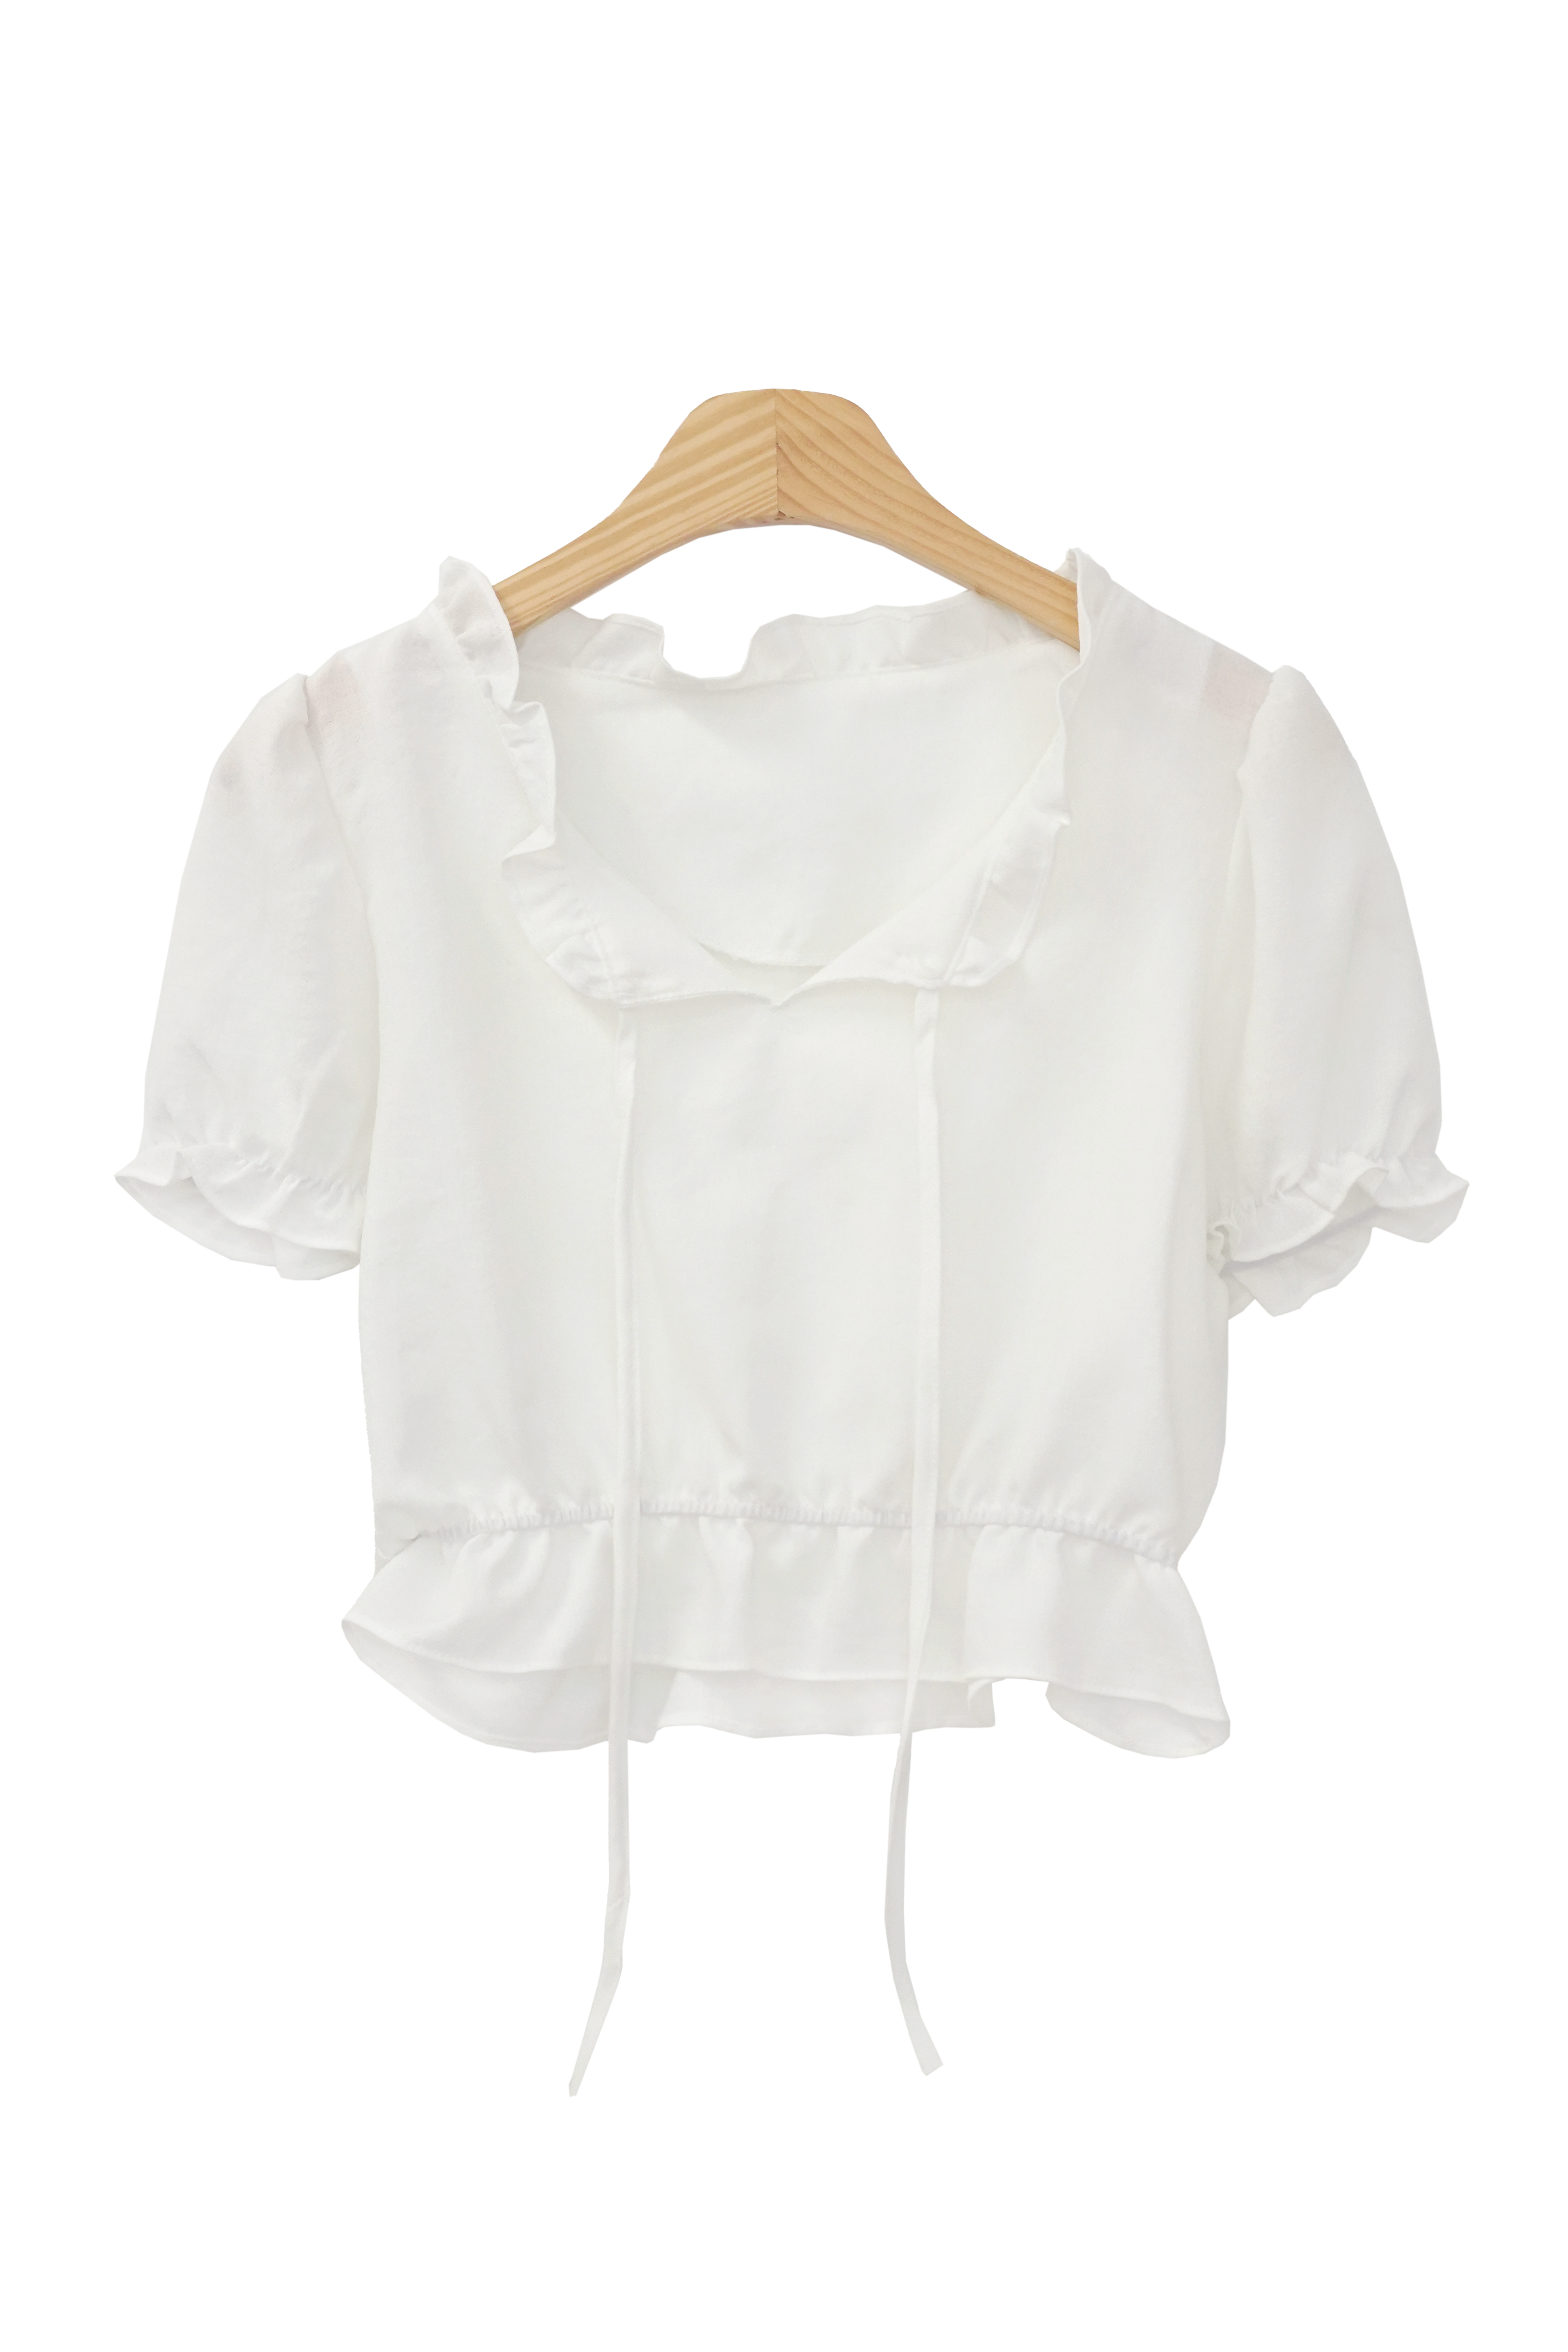 Dozen Frill Puff Summer Short-Sleeved Cropped Blouse (3 colors)